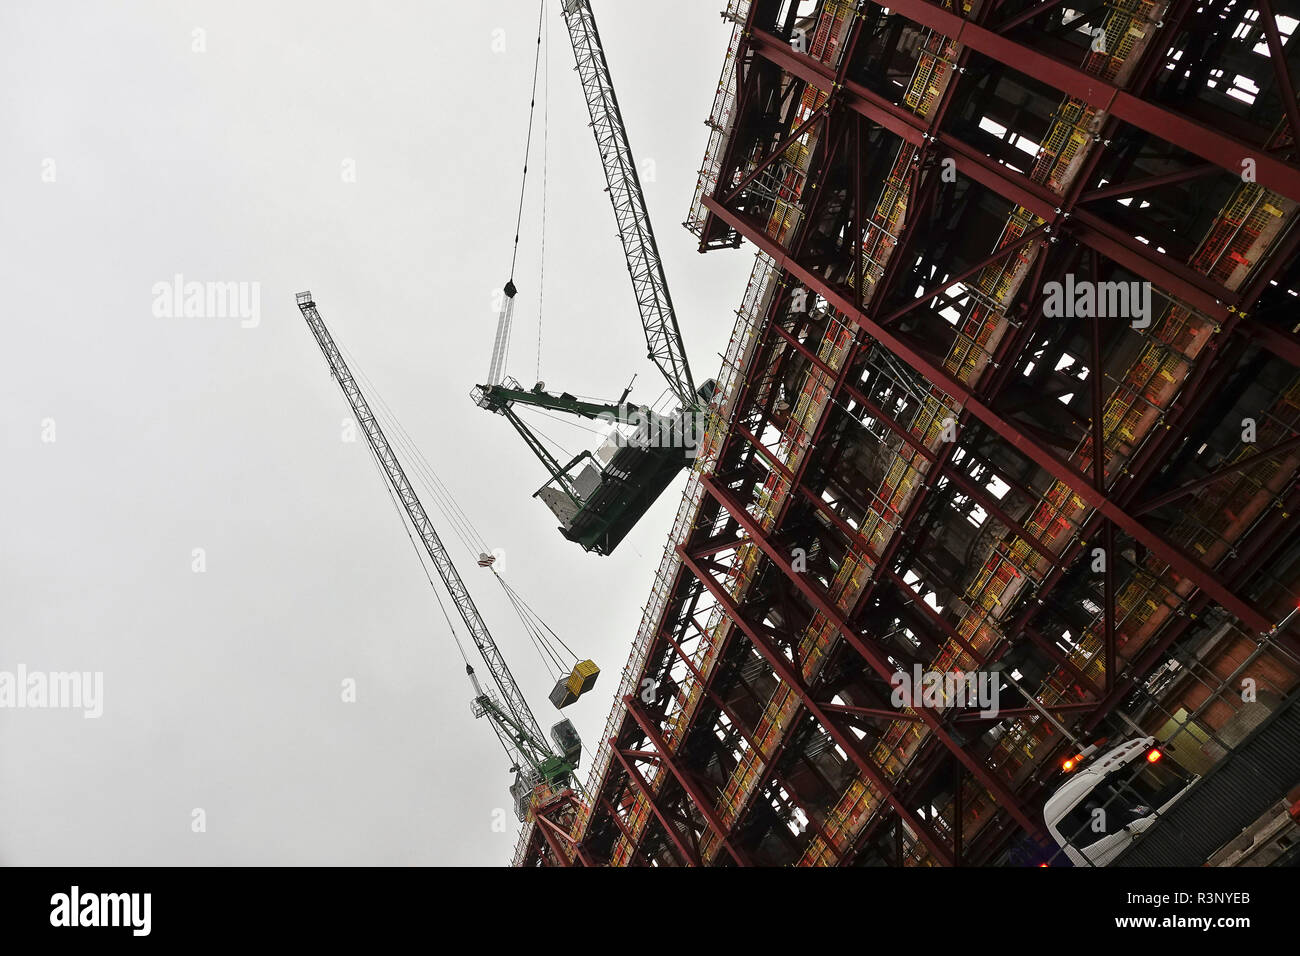 22nd November, 2018 London, UK  Construction work, cranes and scaffold wrapped around a new development in London, UK Stock Photo